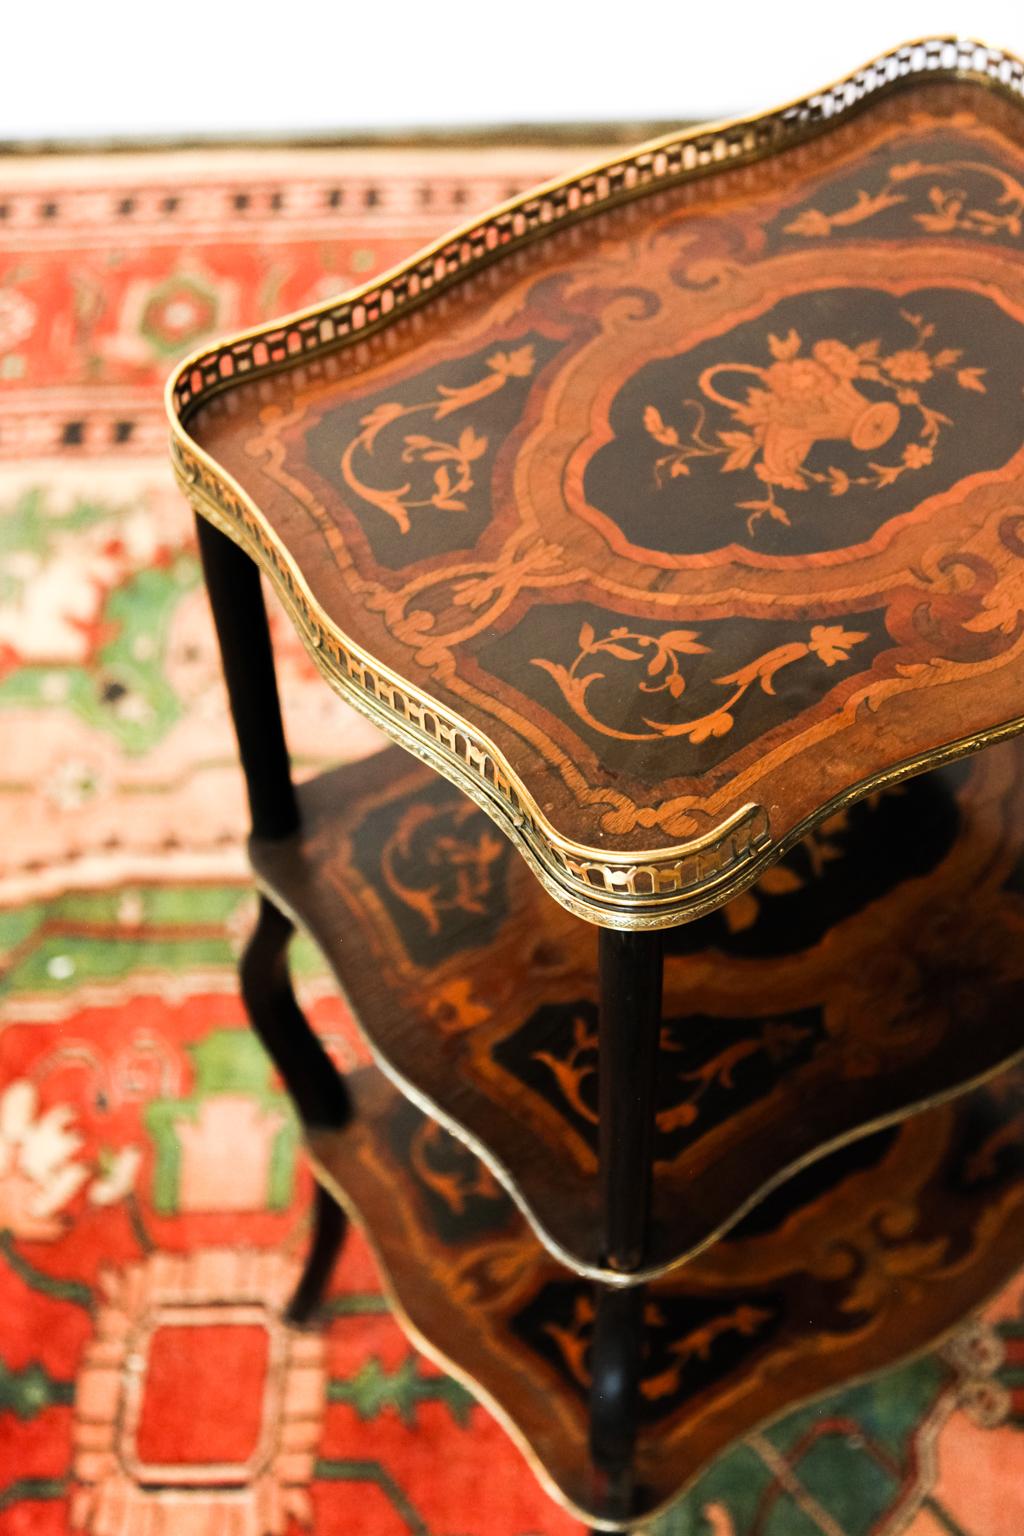 French three-tiered marquetry inlaid table with brass gallery. The shelves are inlaid with baskets of flowers and floral motifs. It is also inlaid with satinwood, birds eye maple, boxwood, and ebony. Each of the three shelves has engraved brass